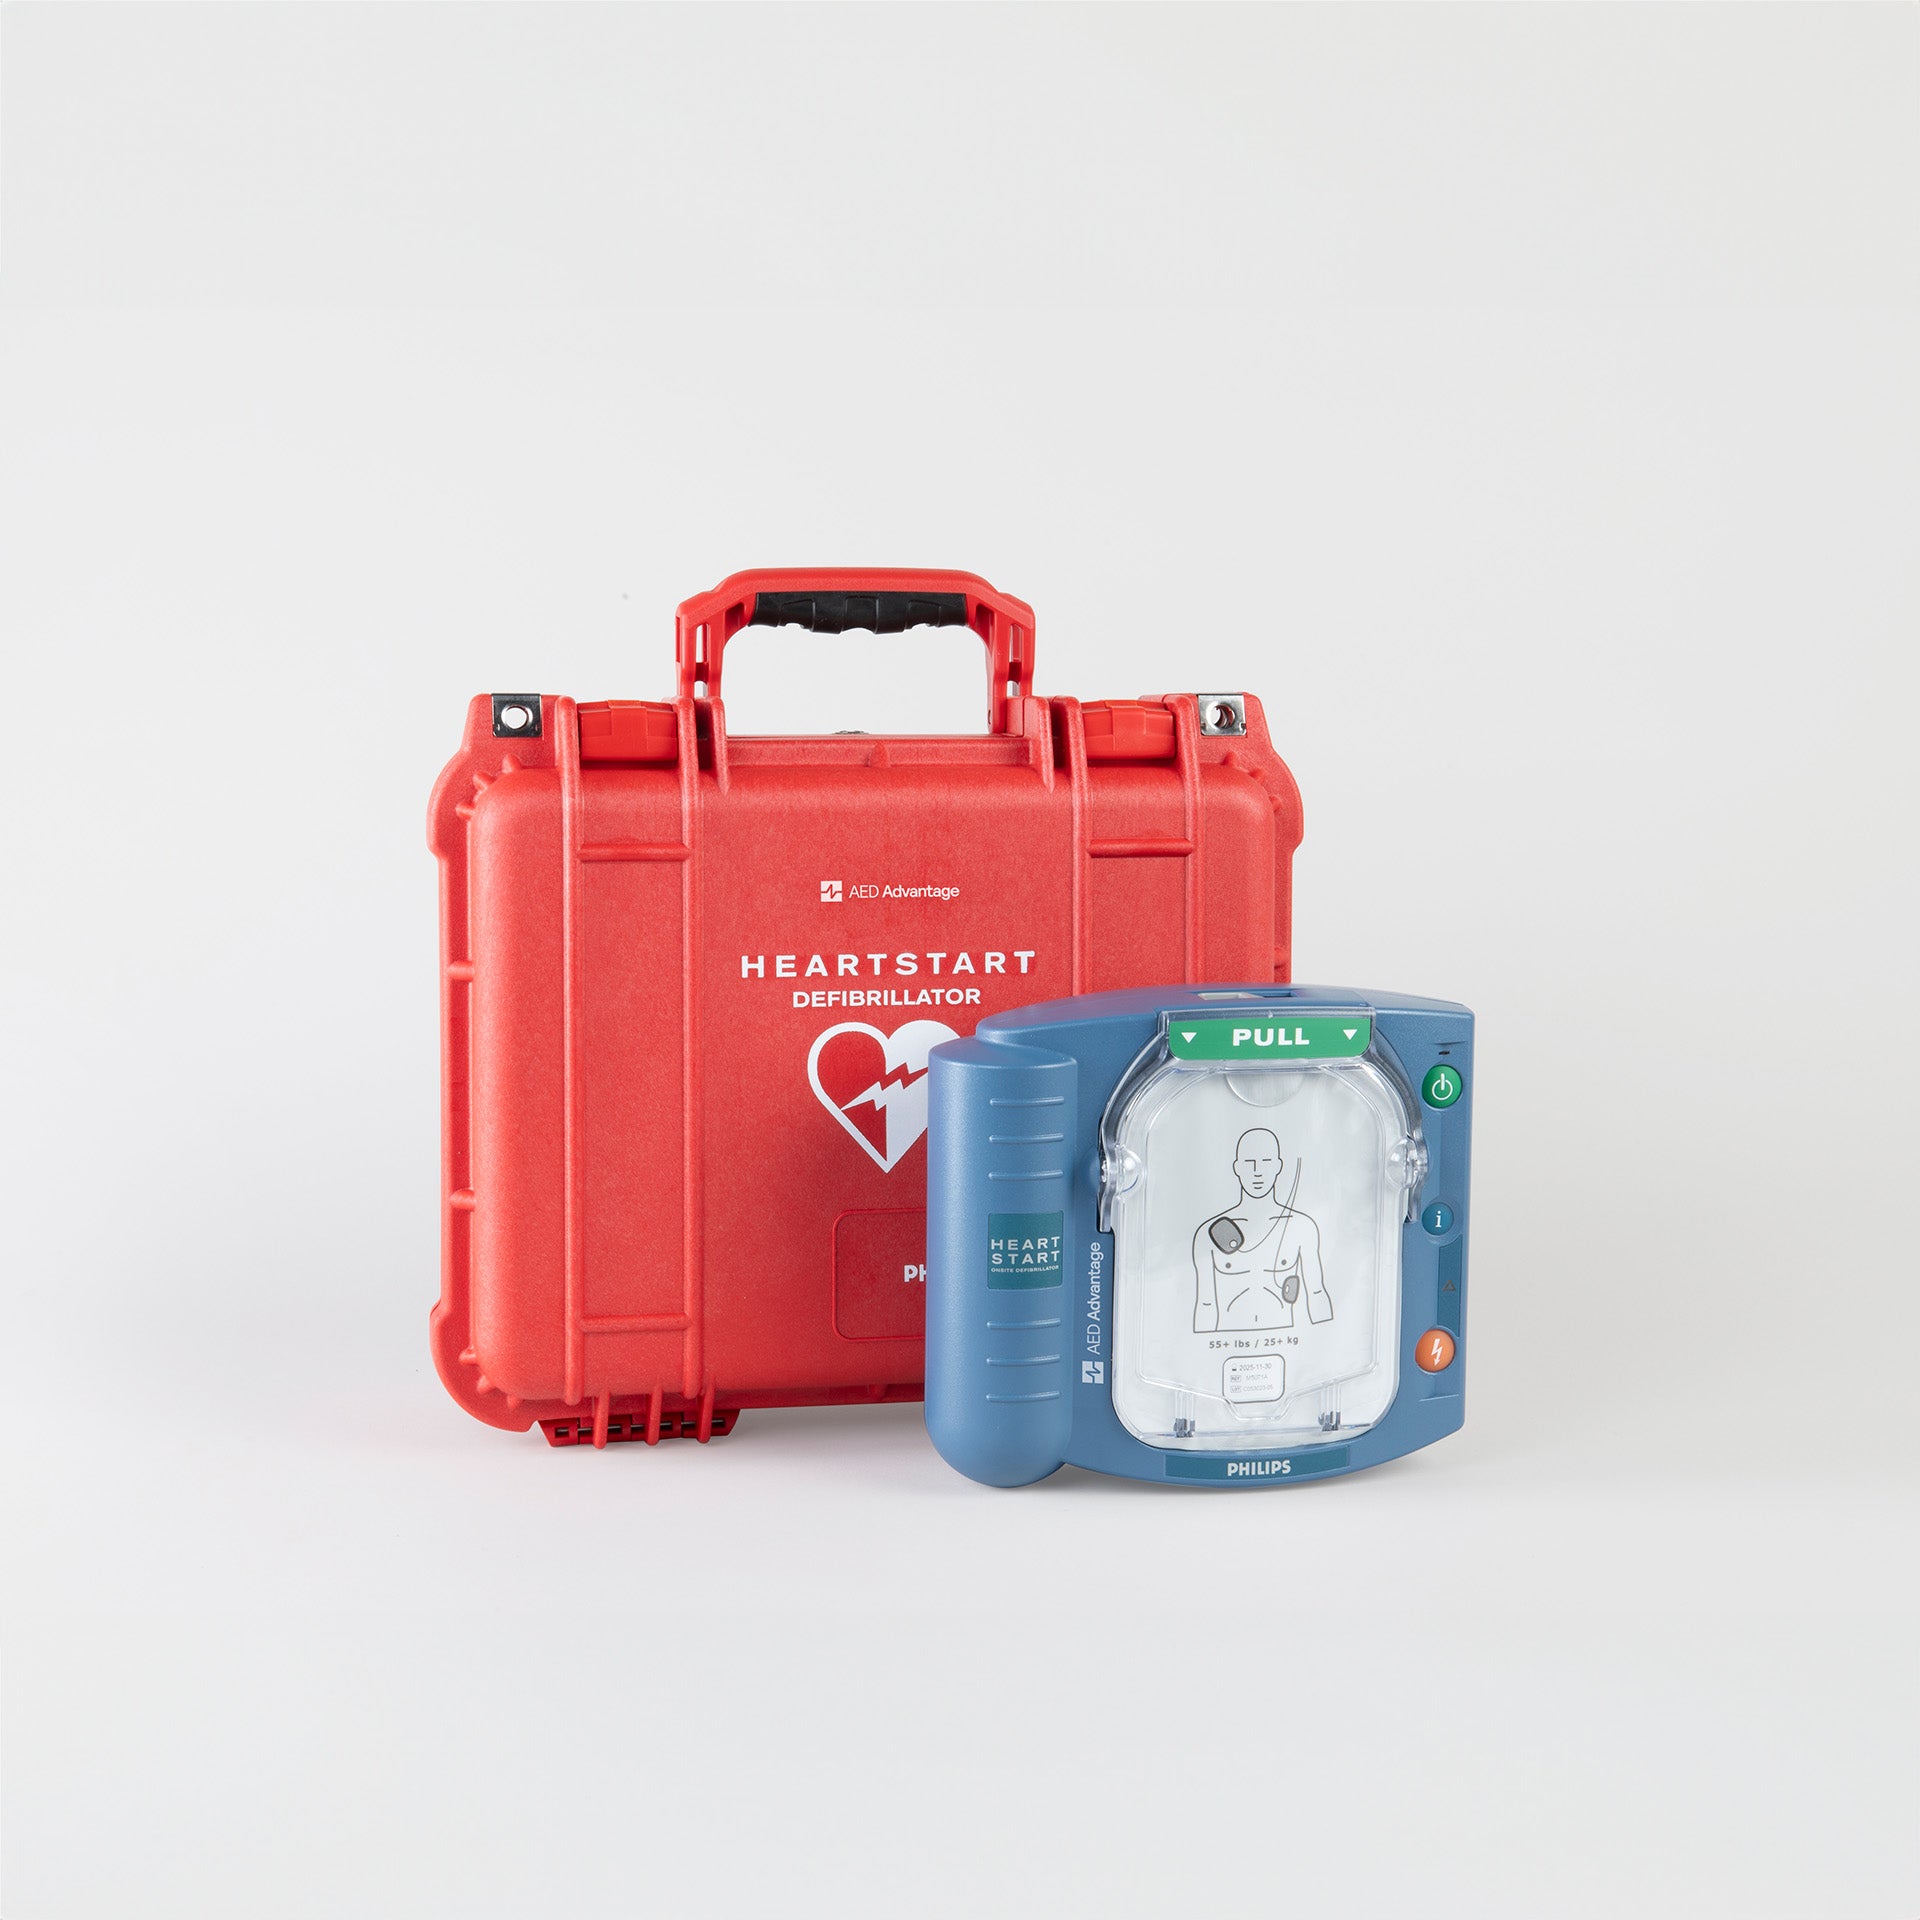 A blue Philips OnSite AED standing next to a bright red hardshell carry case